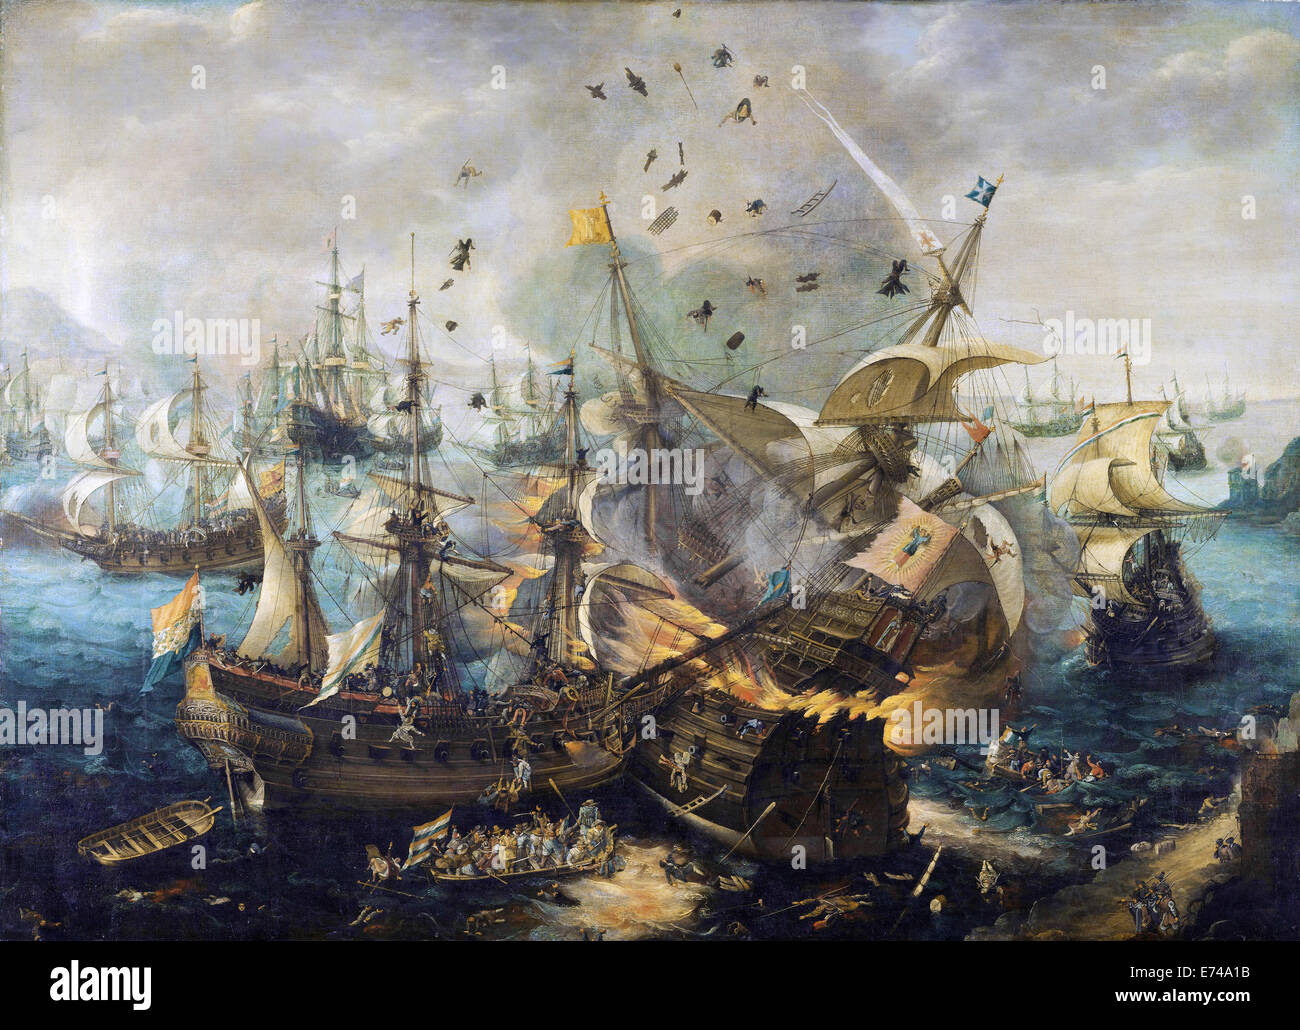 The Explosion of the Spanish Flagship during the Battle of Gibraltar - by Cornelis Claesz van Wieringen, 1621 Stock Photo